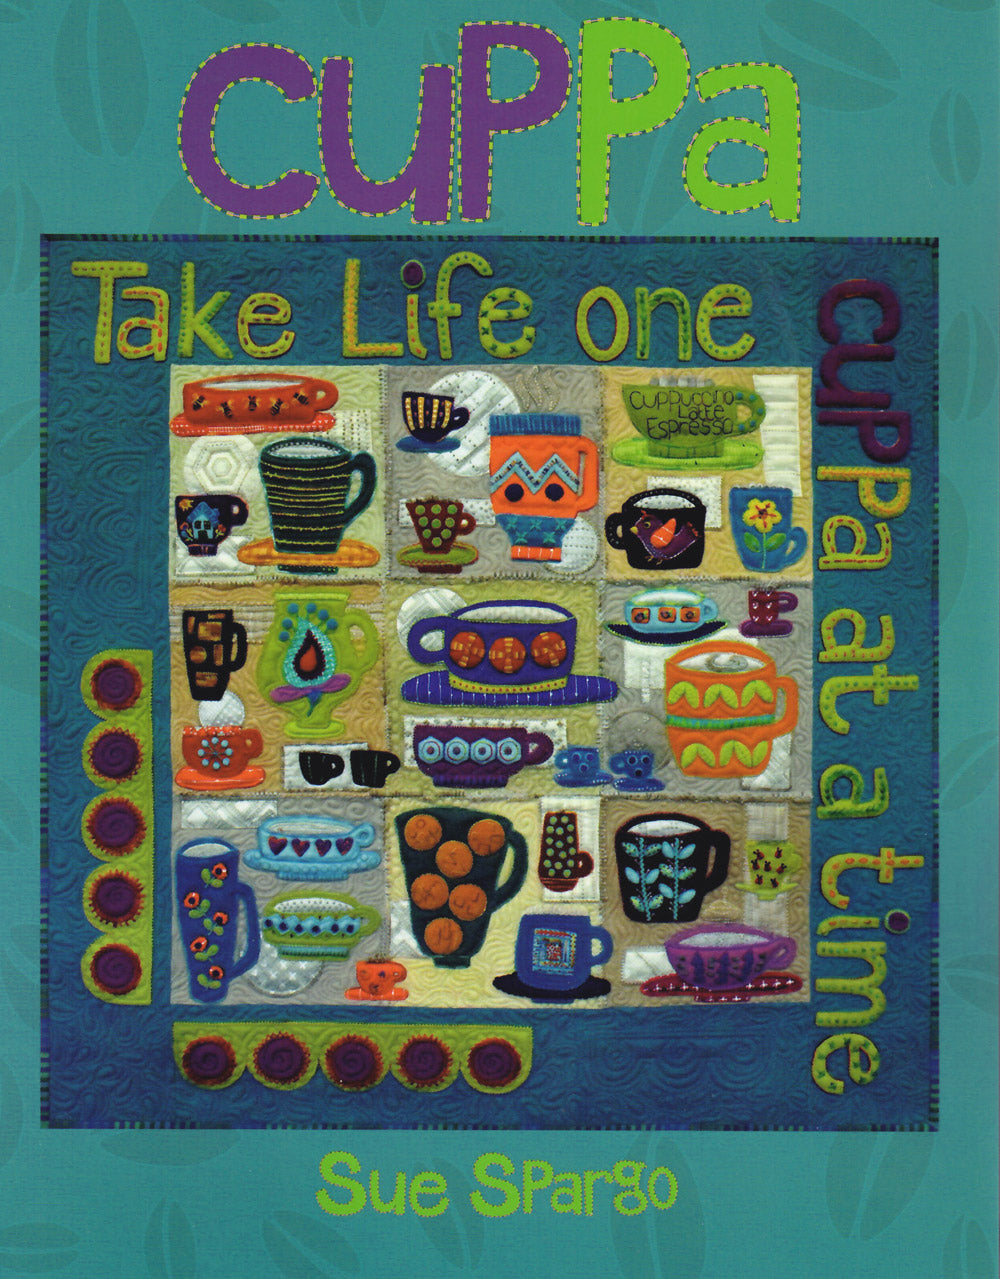 Cuppa - Applique, Embroidery, and Quilt Pattern Book by Sue Spargo of Folk Art Quilts